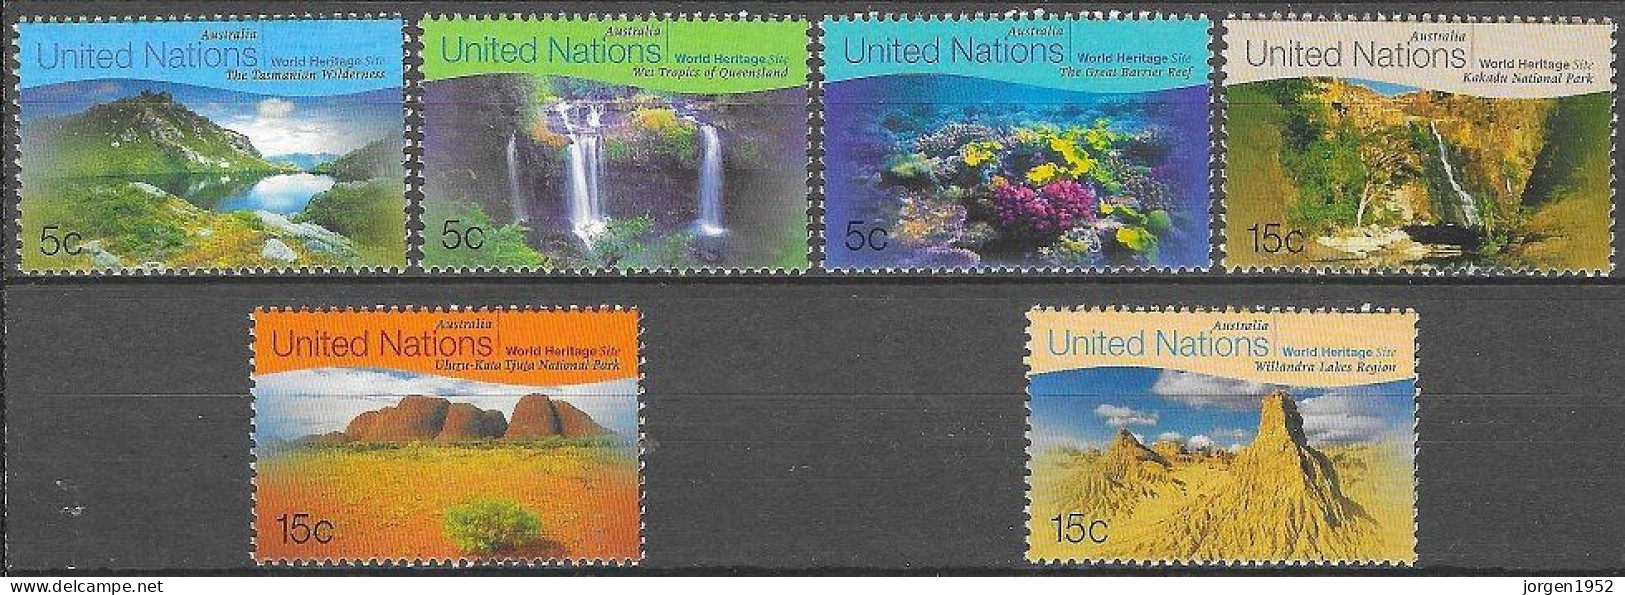 UNITED NATIONS # NEW YORK FROM 1999 STAMPWORLD 809-14** - Nuevos